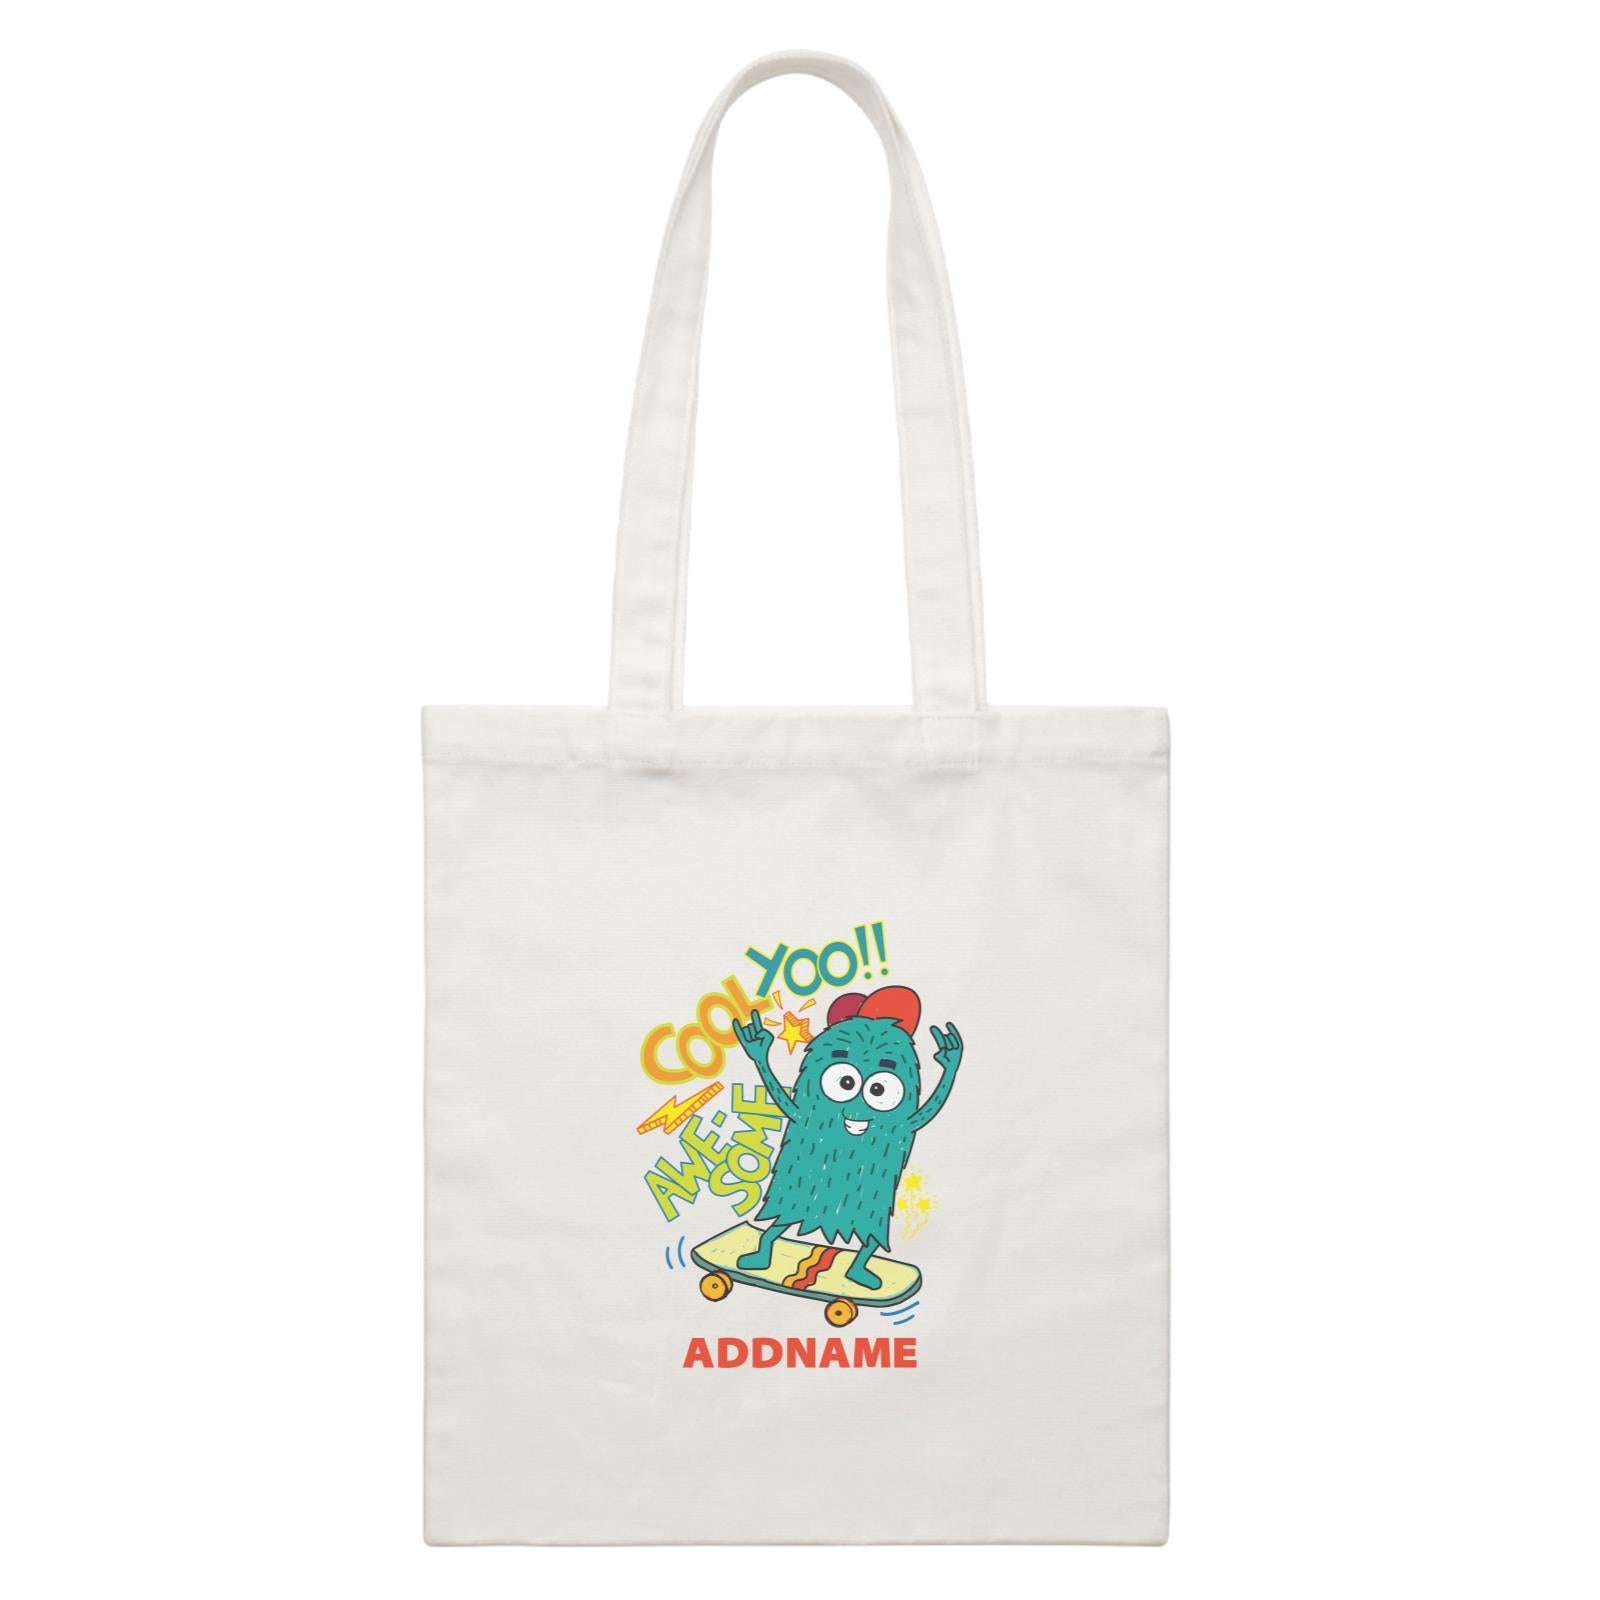 Cool Cute Monster Cool Yoo Awesome Skateboard Monster Addname White Canvas Bag